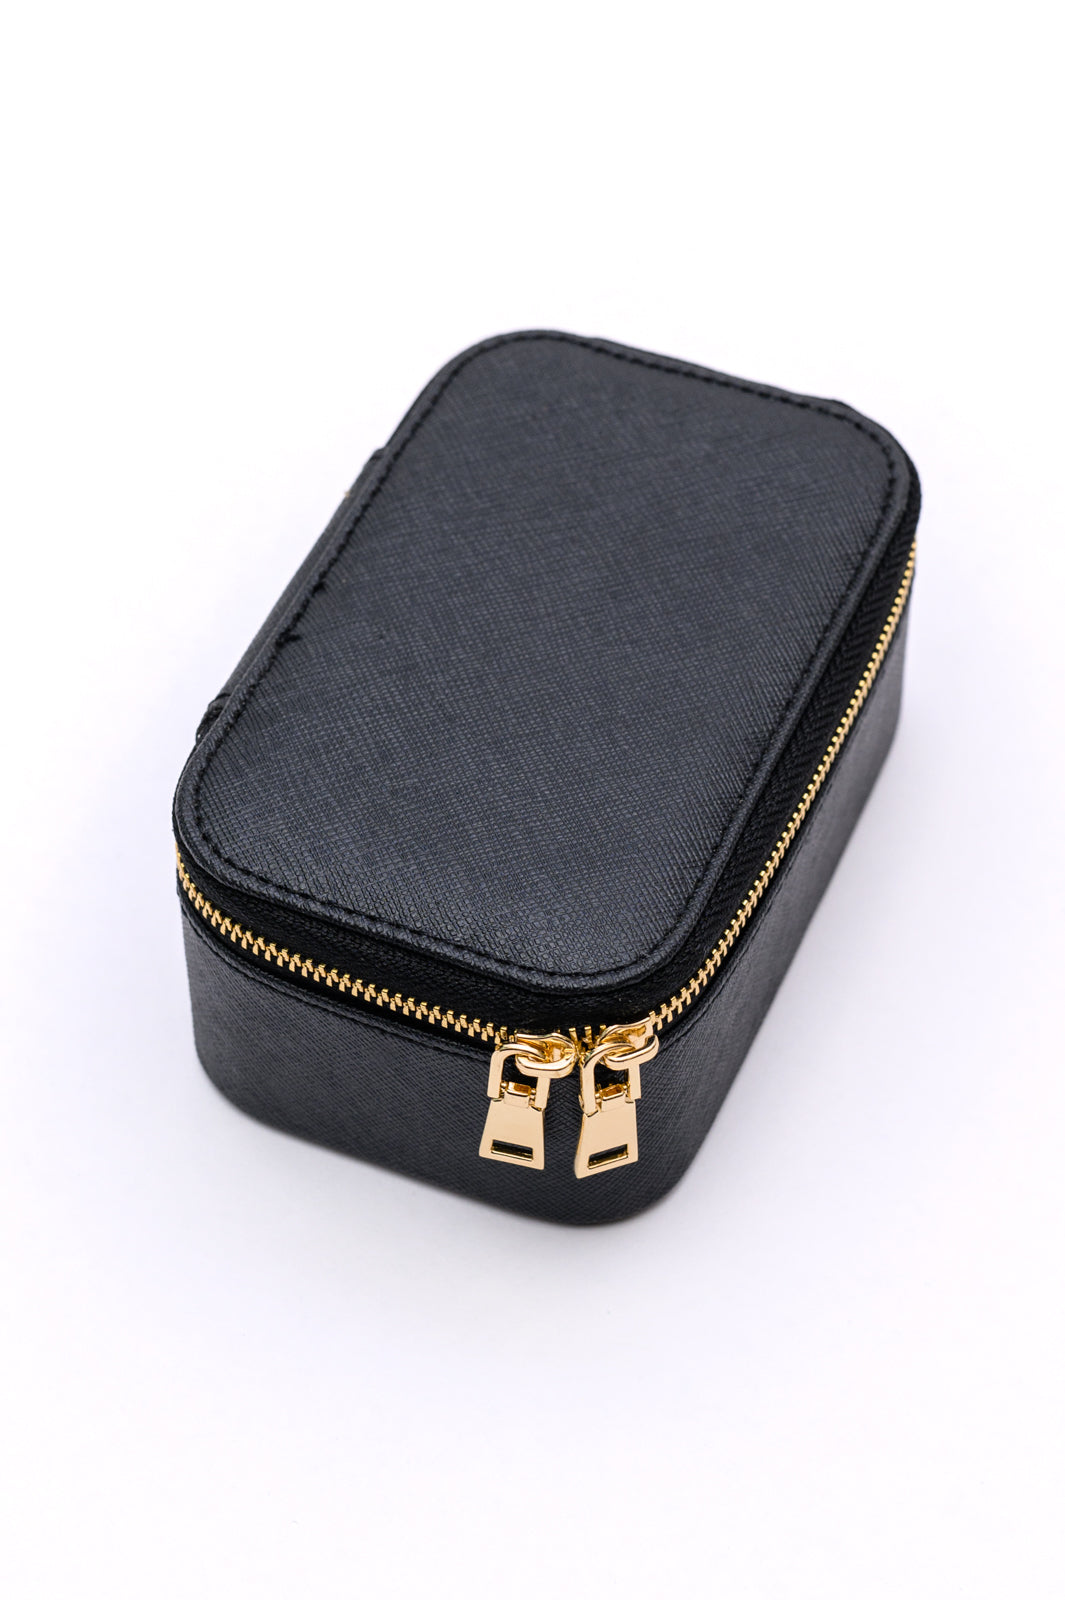 Travel Jewelry Case in Black-220 Beauty/Gift-Inspired by Justeen-Women's Clothing Boutique in Chicago, Illinois